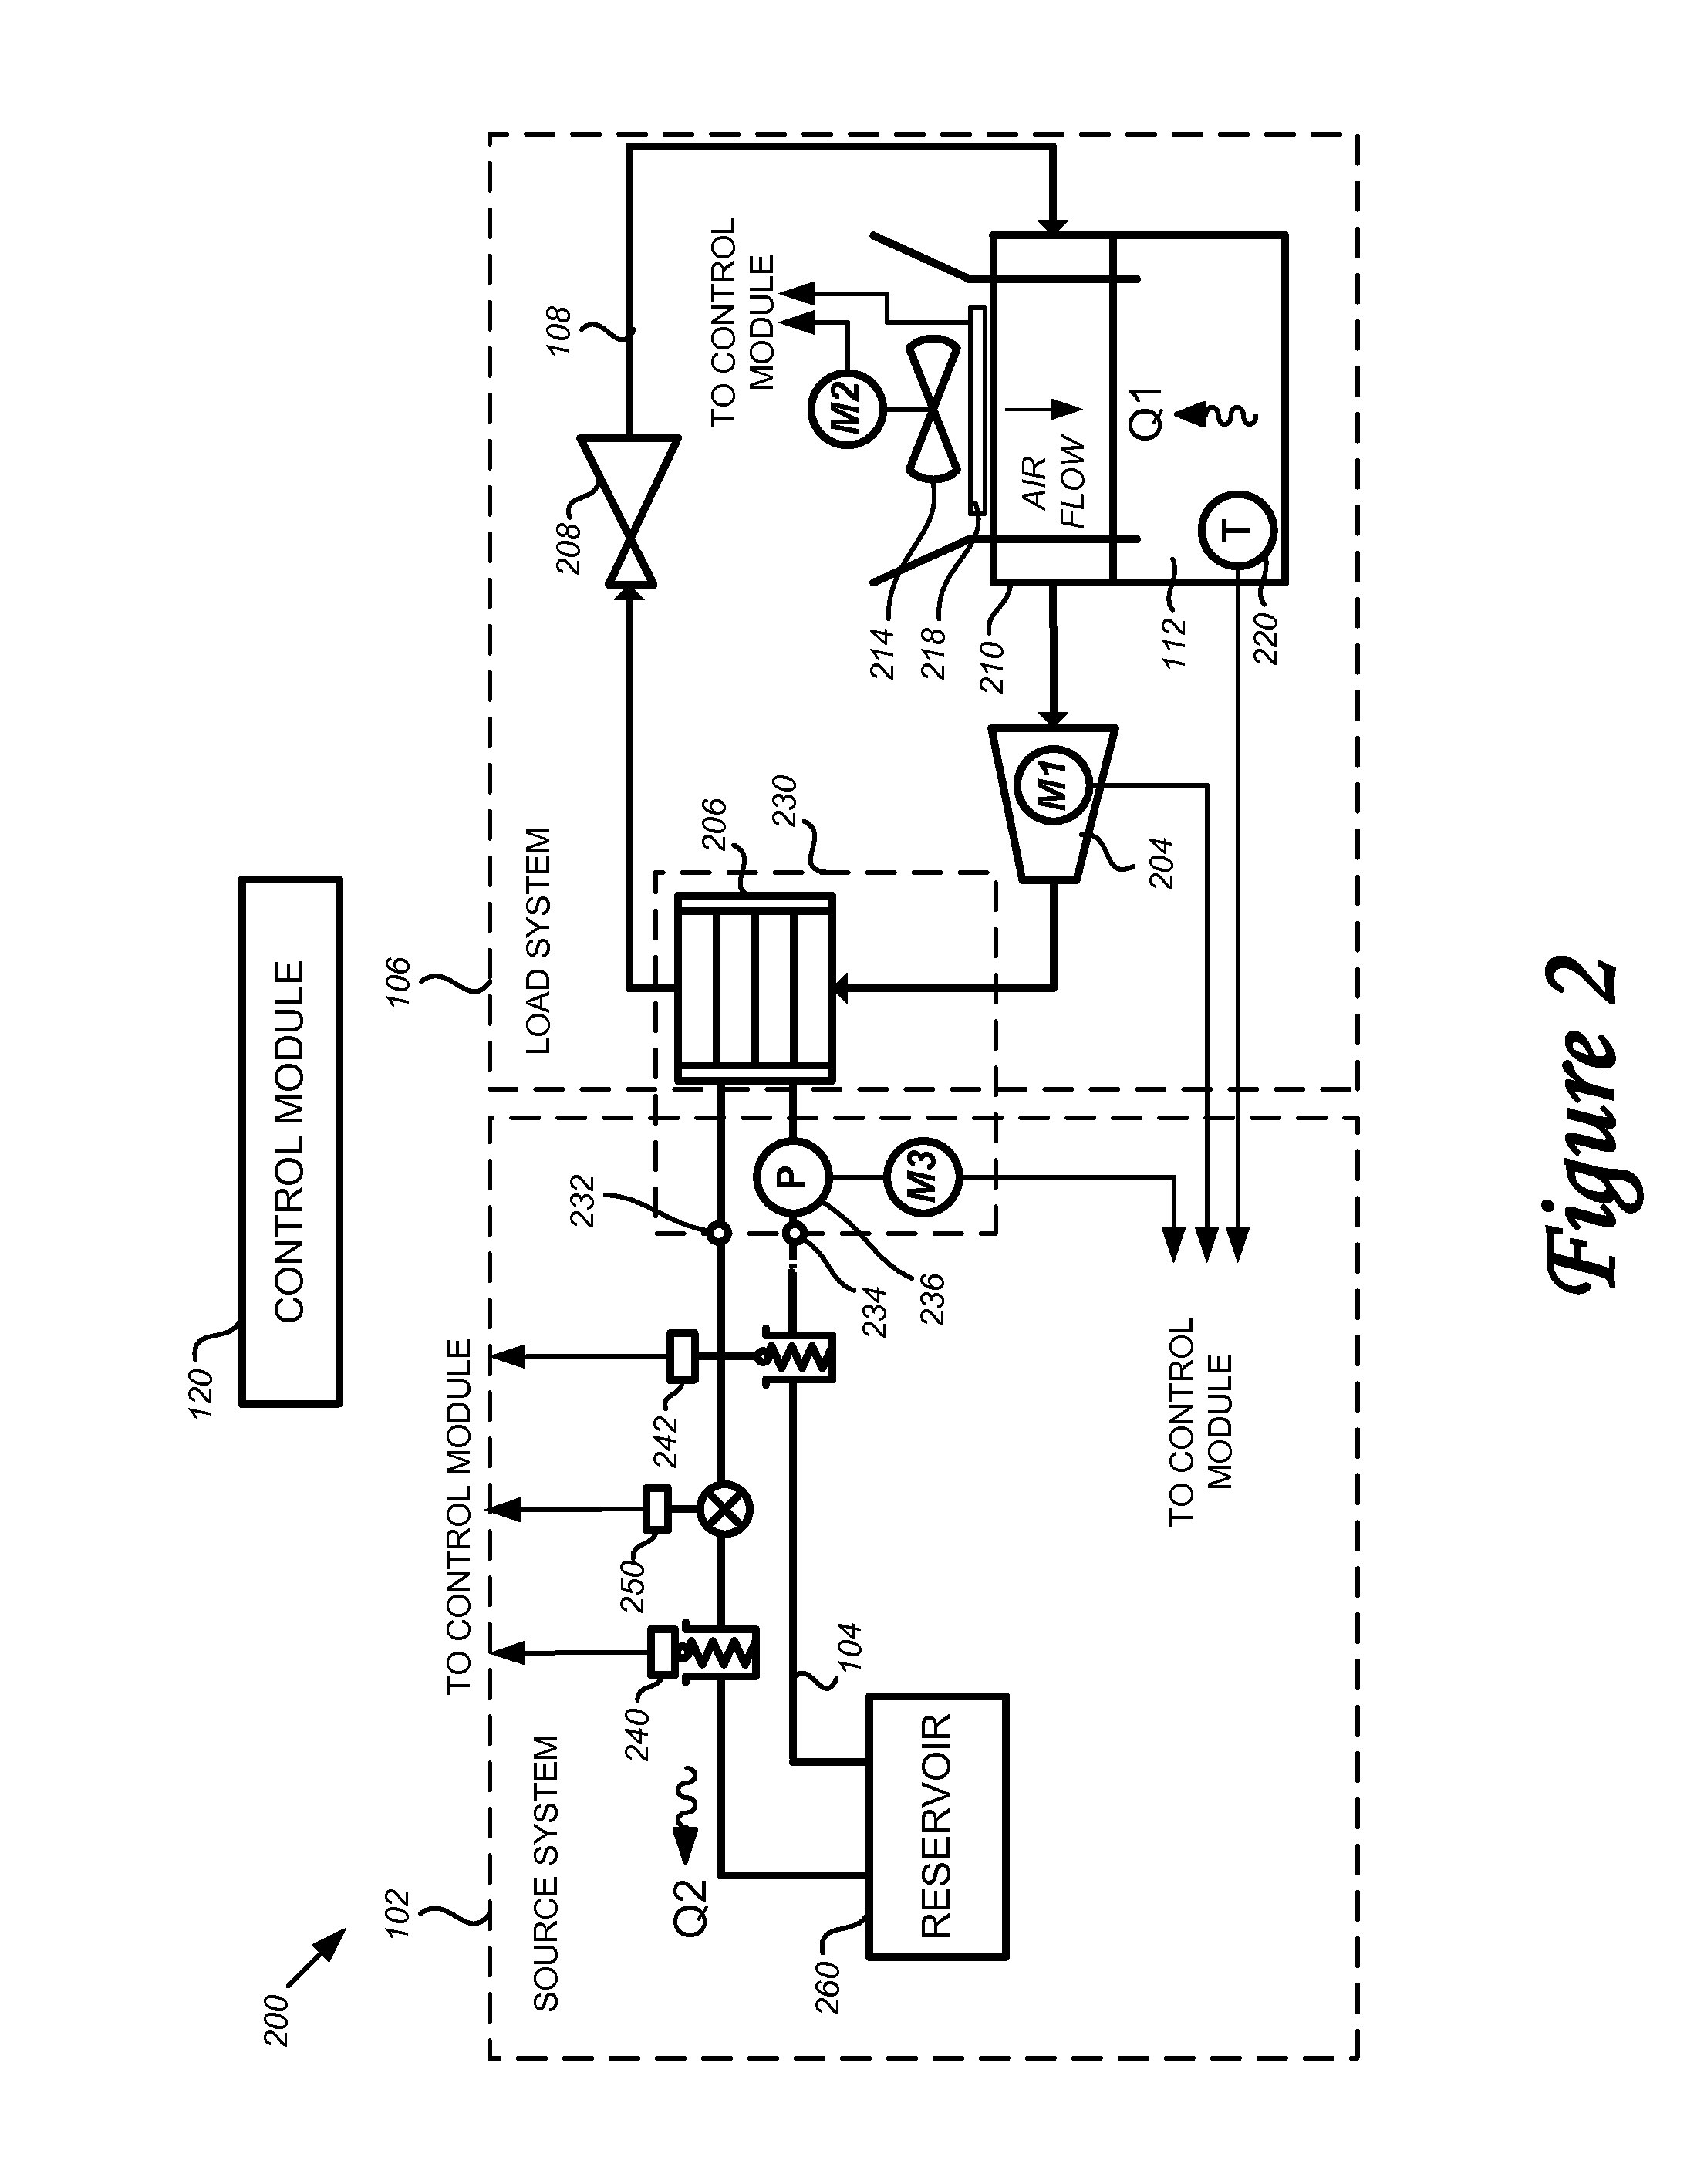 Space conditioning control and monitoring method and system